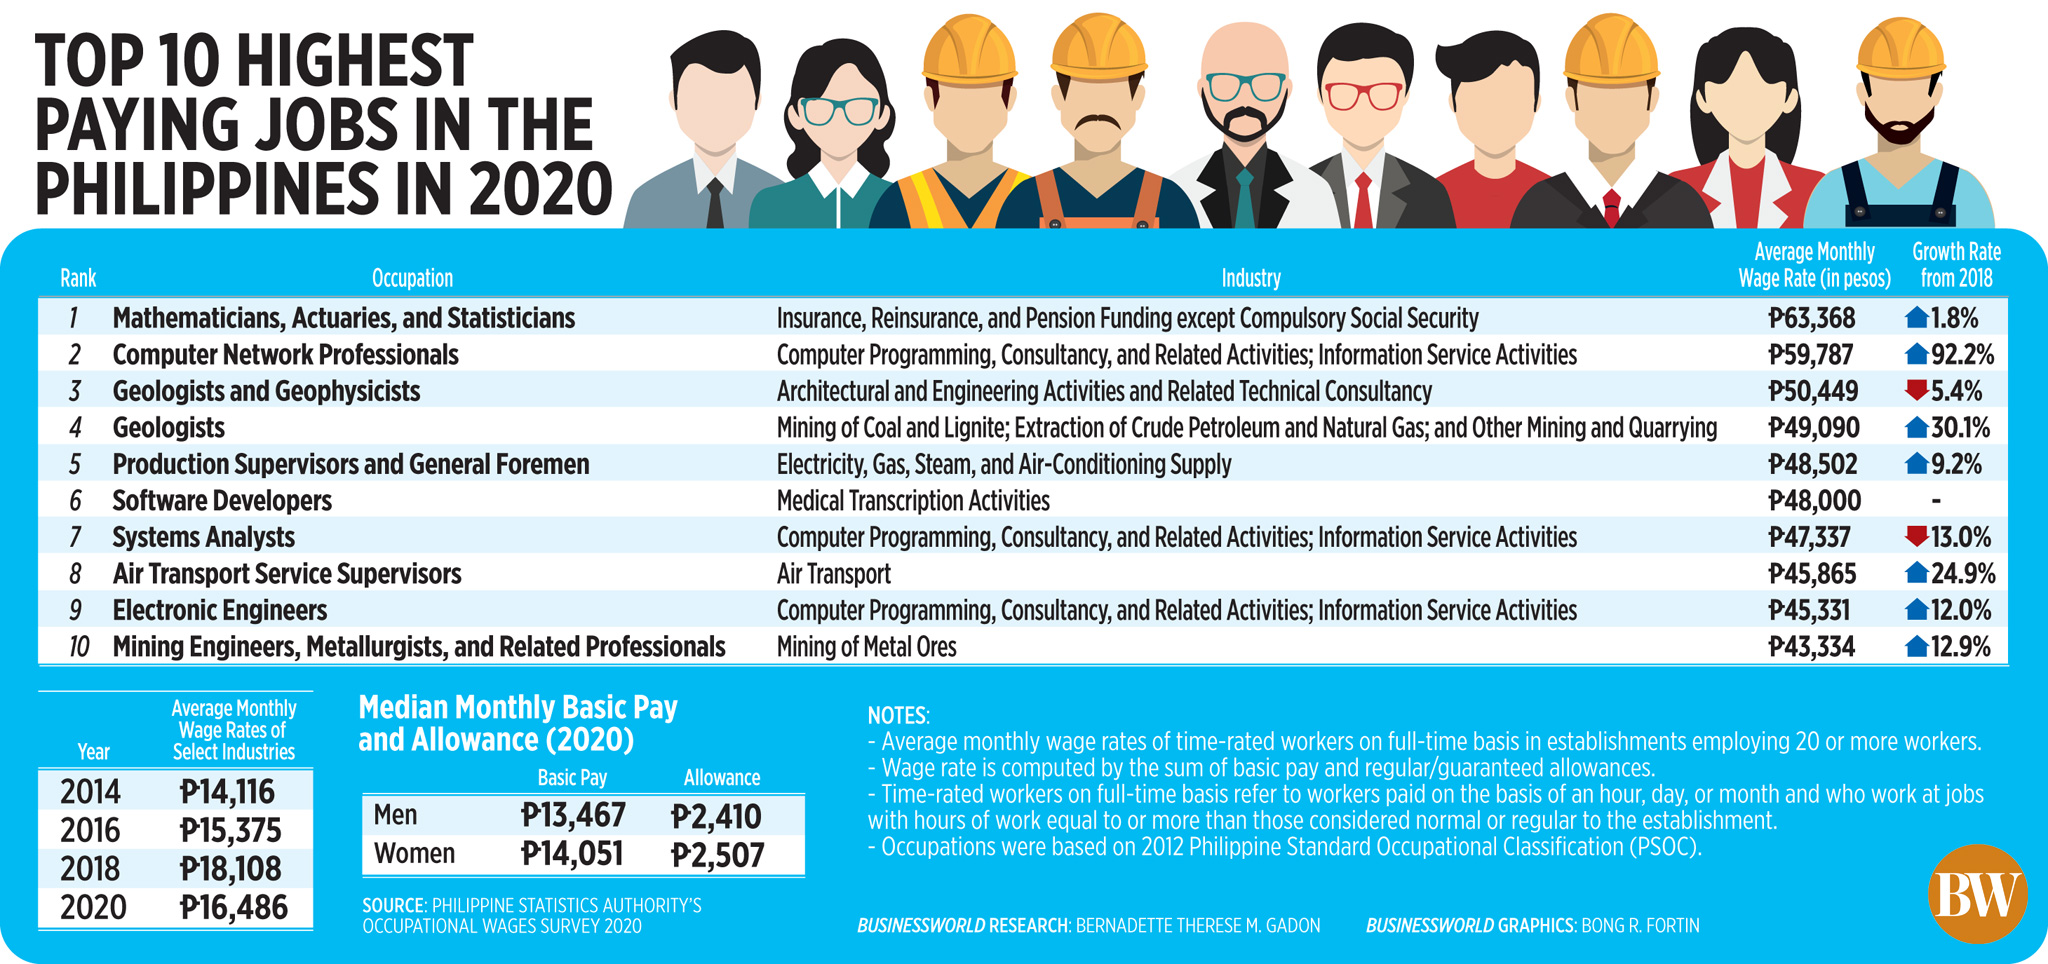 Top 10 highest paying jobs in the Philippines in 2020